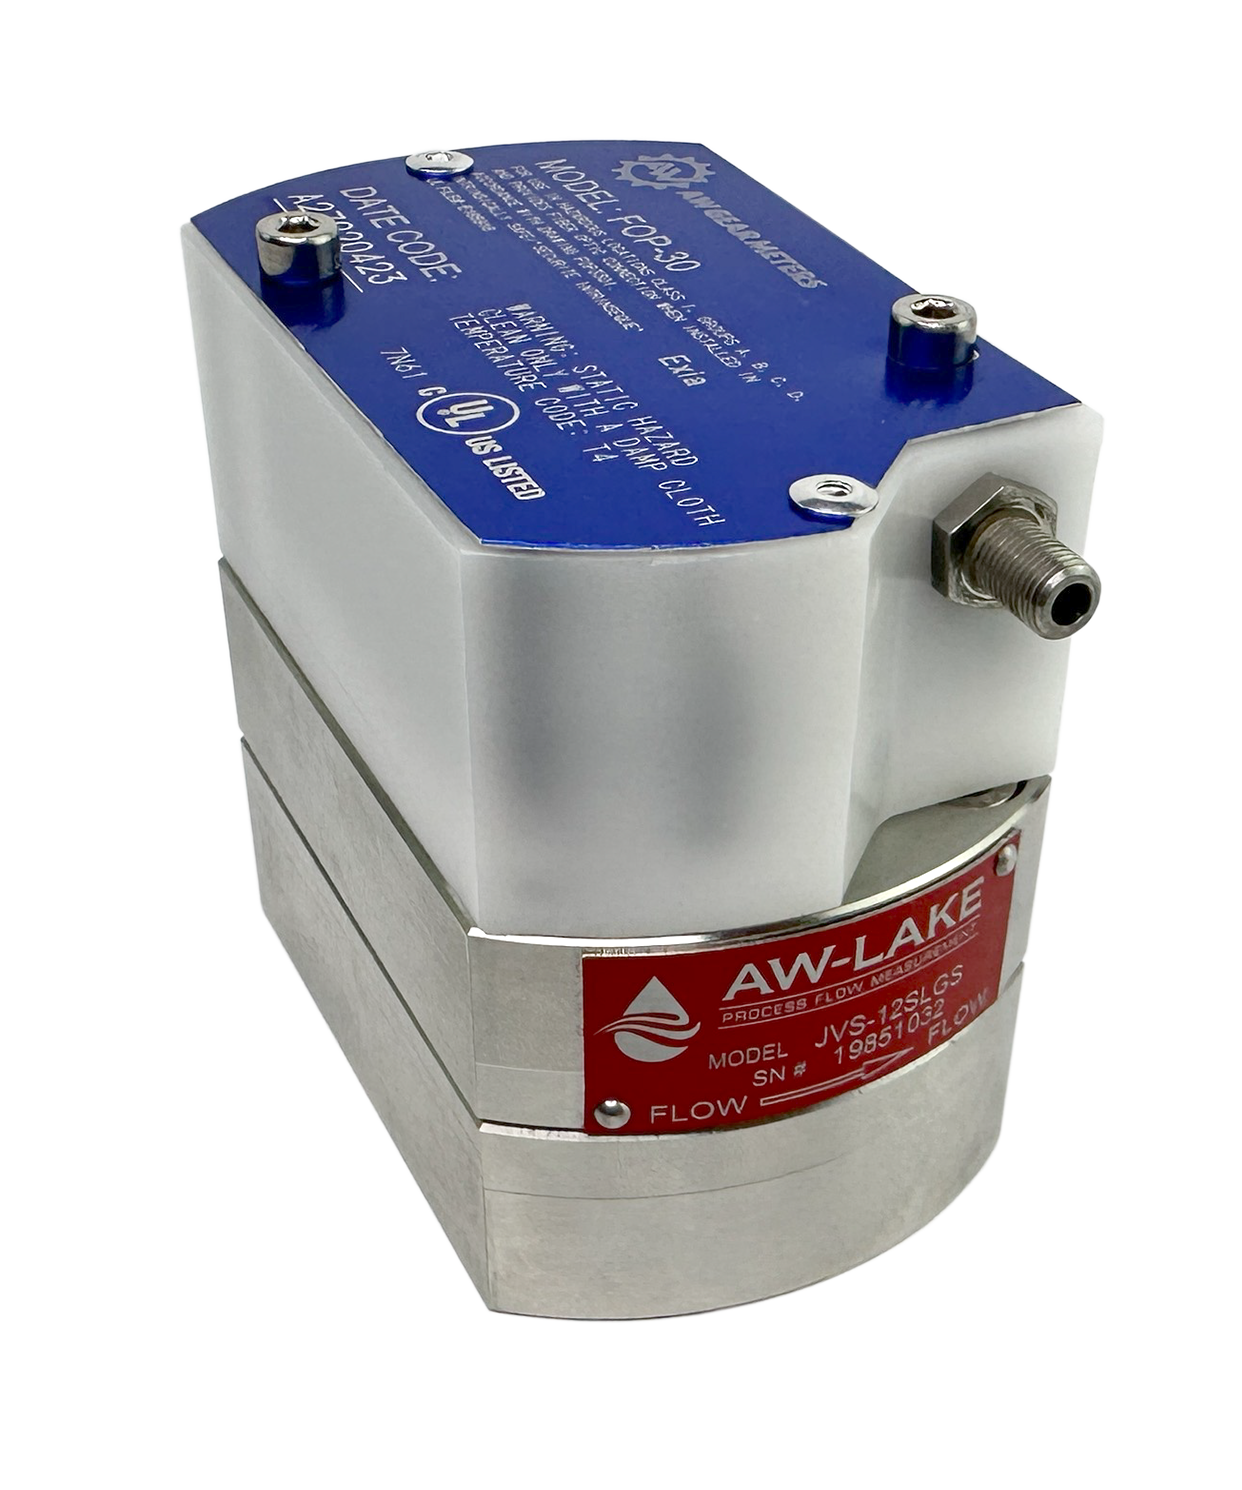 Compact PD flow meter for tight spaces and robotic arms